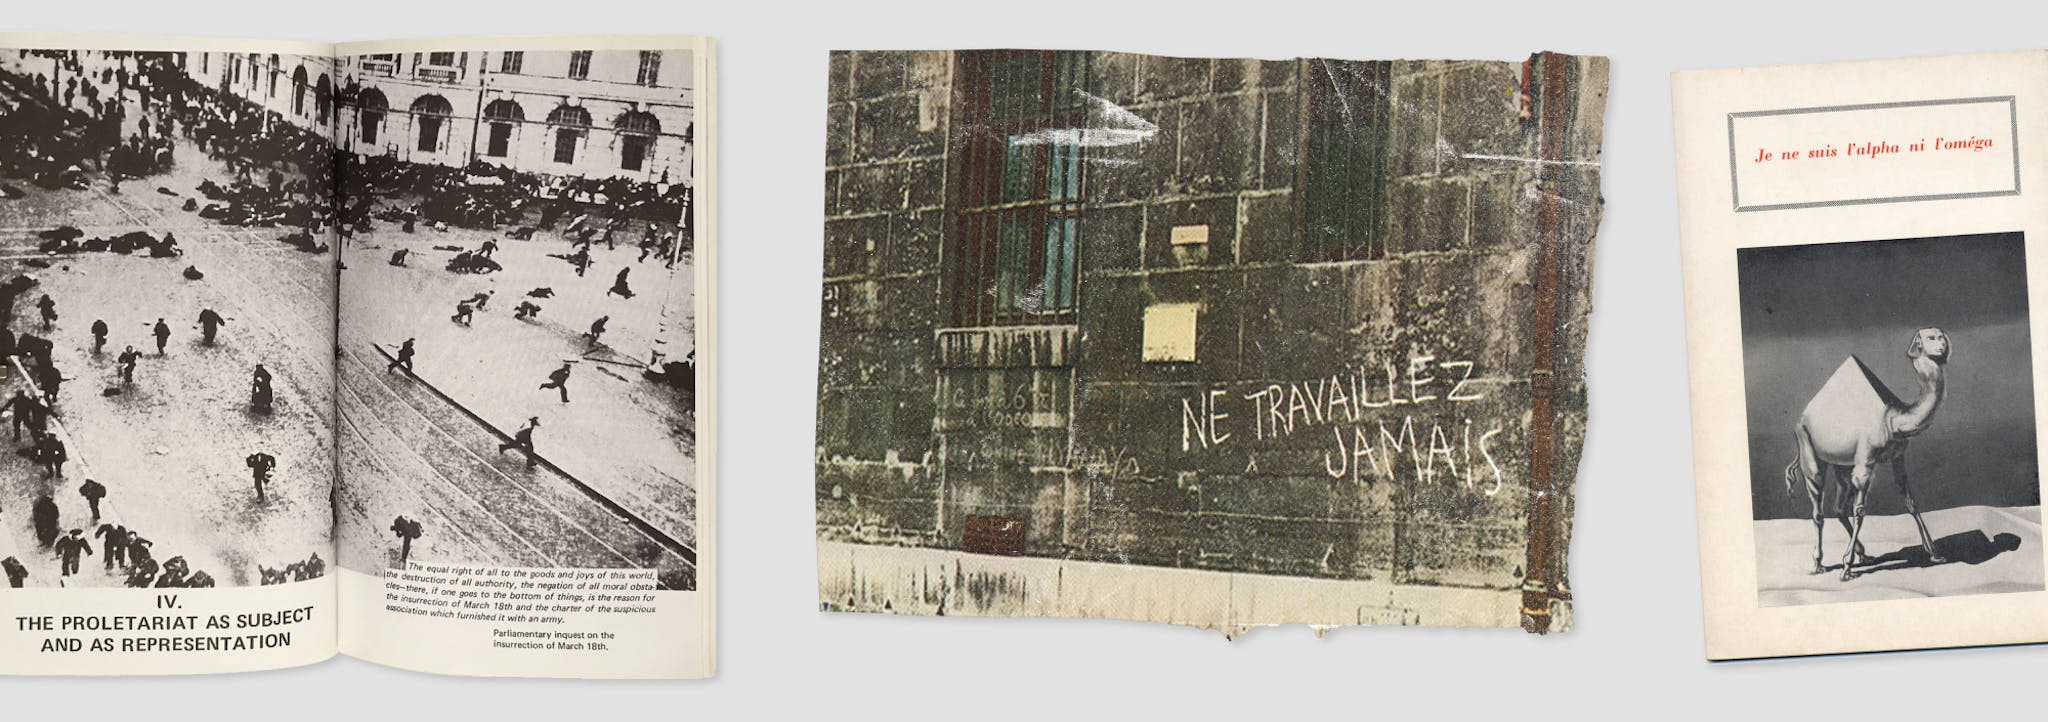 Three images: Left, a black and white crowd photo titled 'THE PROLETARIAT AS SUBJECT AND AS REPRESENTATION'; middle, a wall with graffiti 'NE TRAVAILLEZ JAMAIS'; right, a book page with a camel with a human face, captioned 'Je ne suis l'alpha ni l'oméga'.